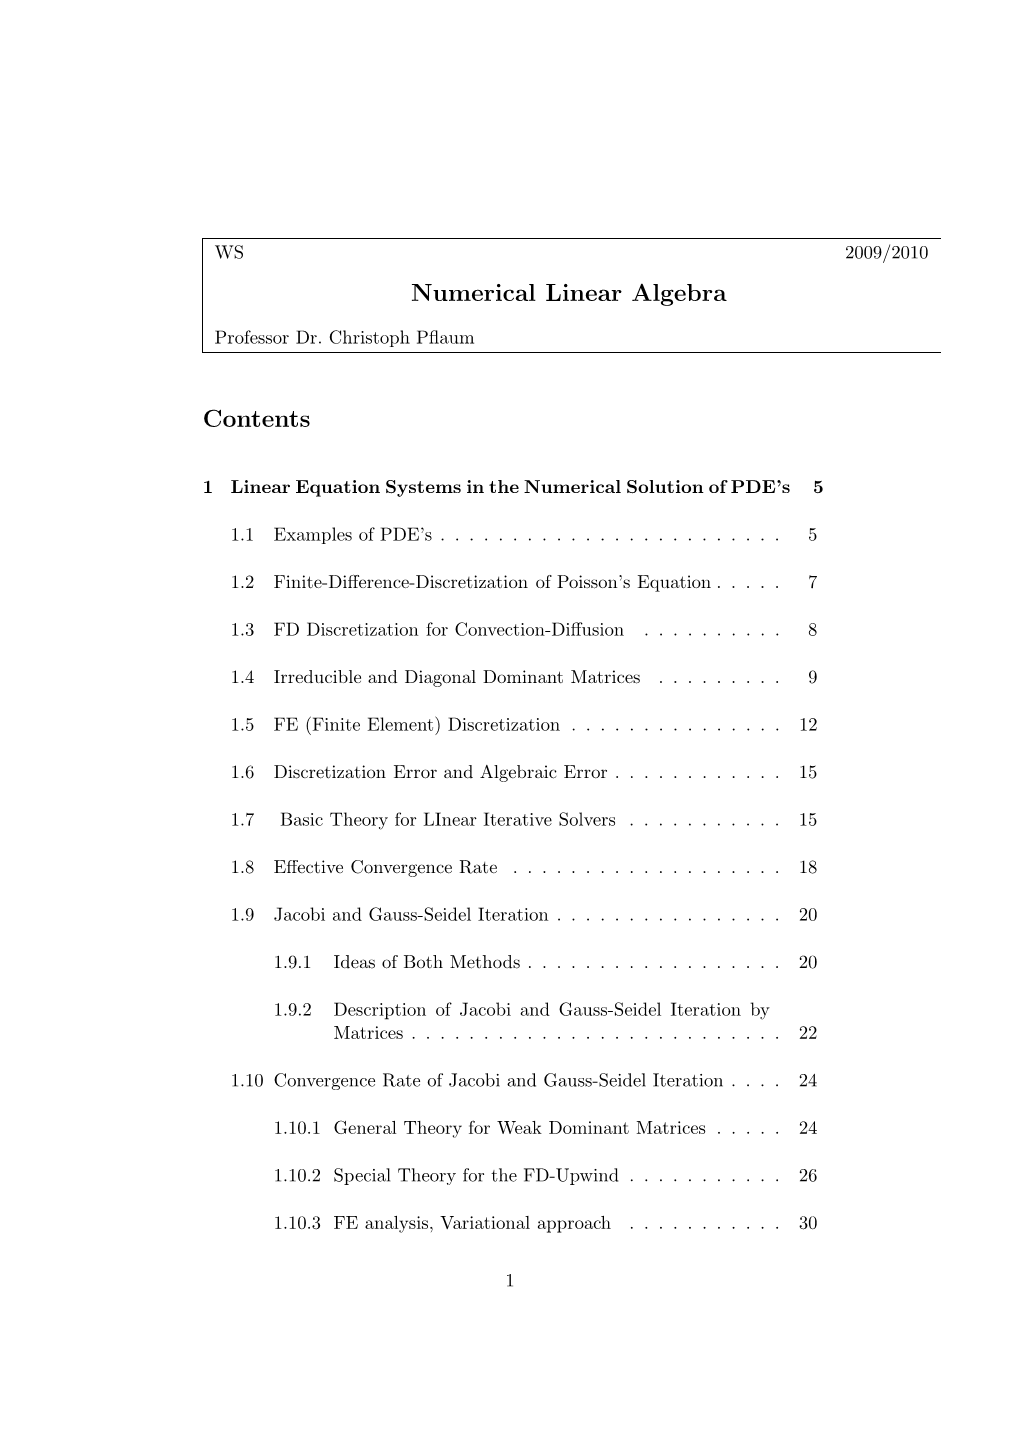 Numerical Linear Algebra Contents